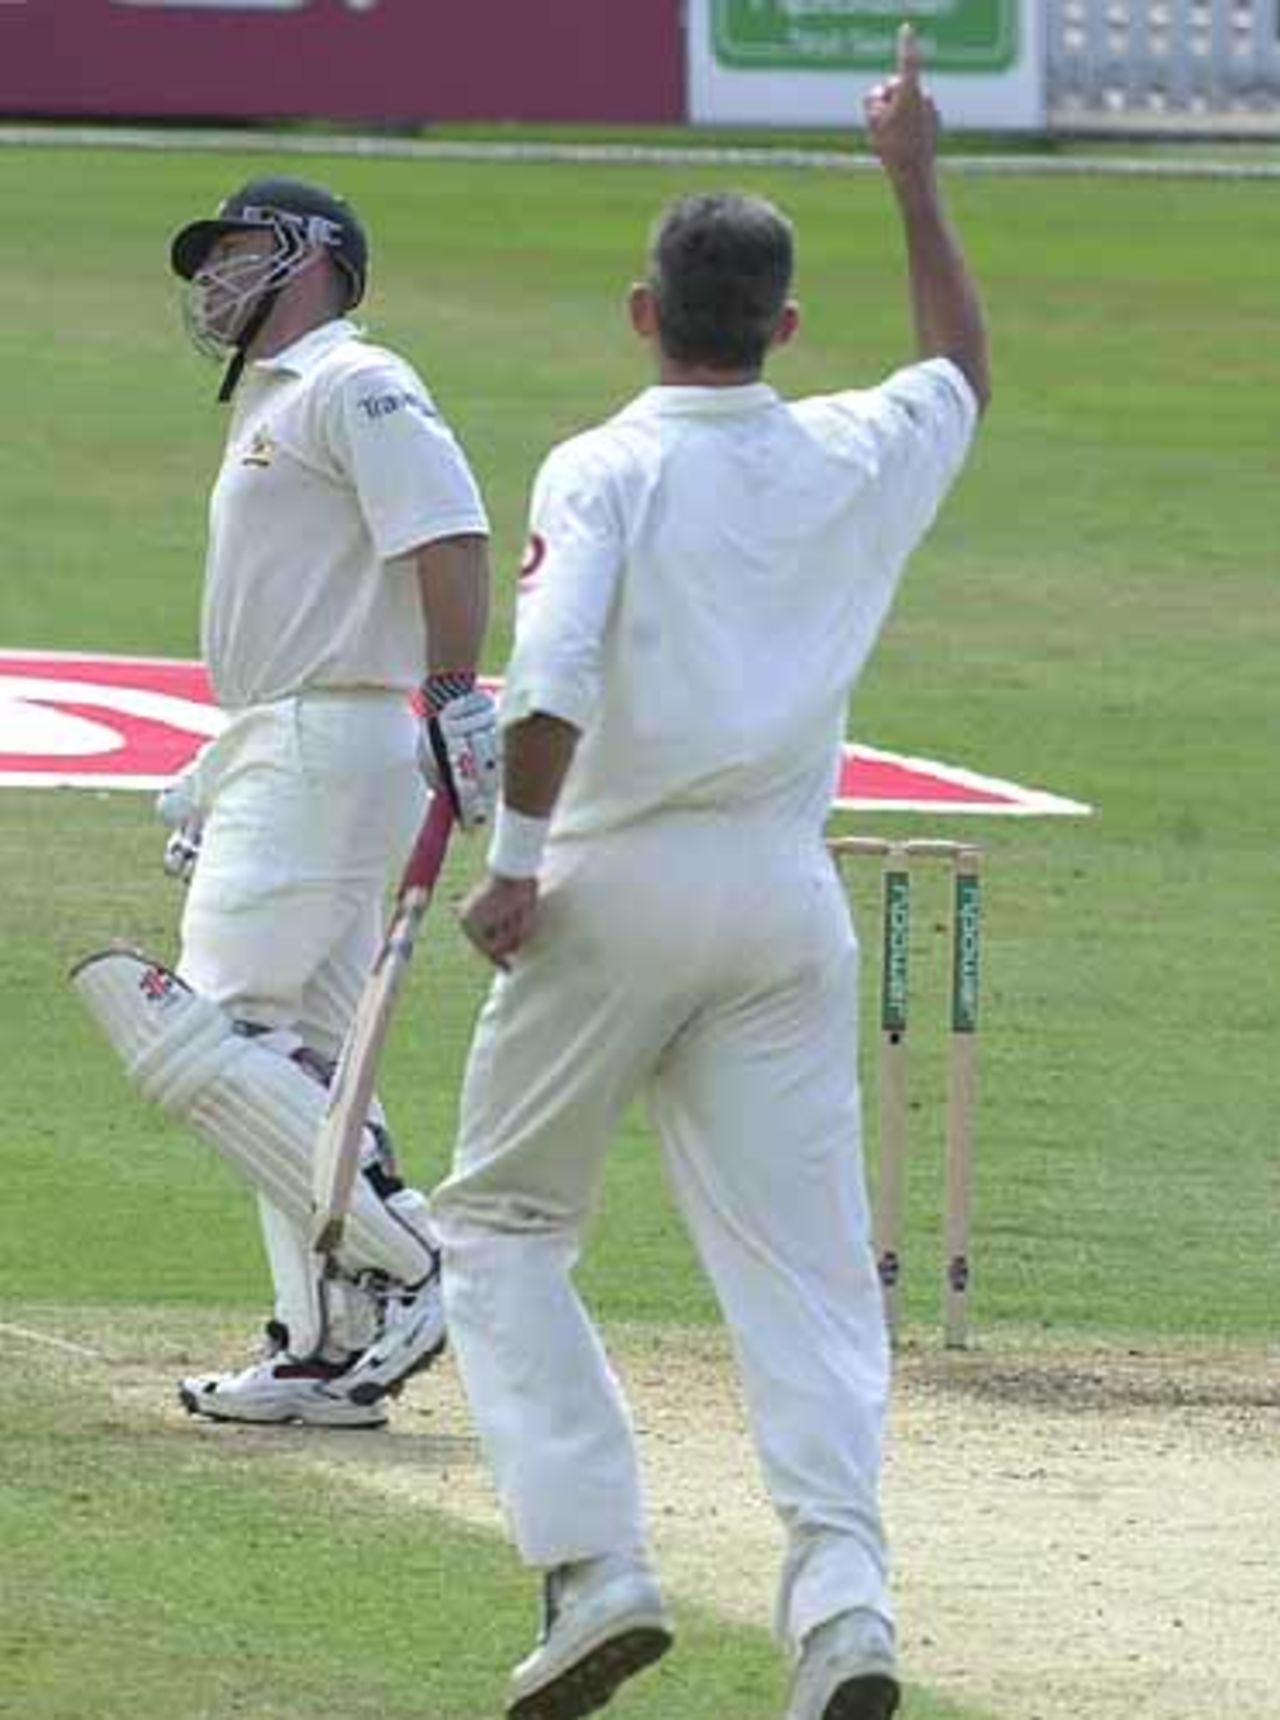 Off you go, as Caddick captures the wicket of Slater in the Australian second innings, The Ashes 3rd npower Test, Nottingham, 02-06 Aug 2001